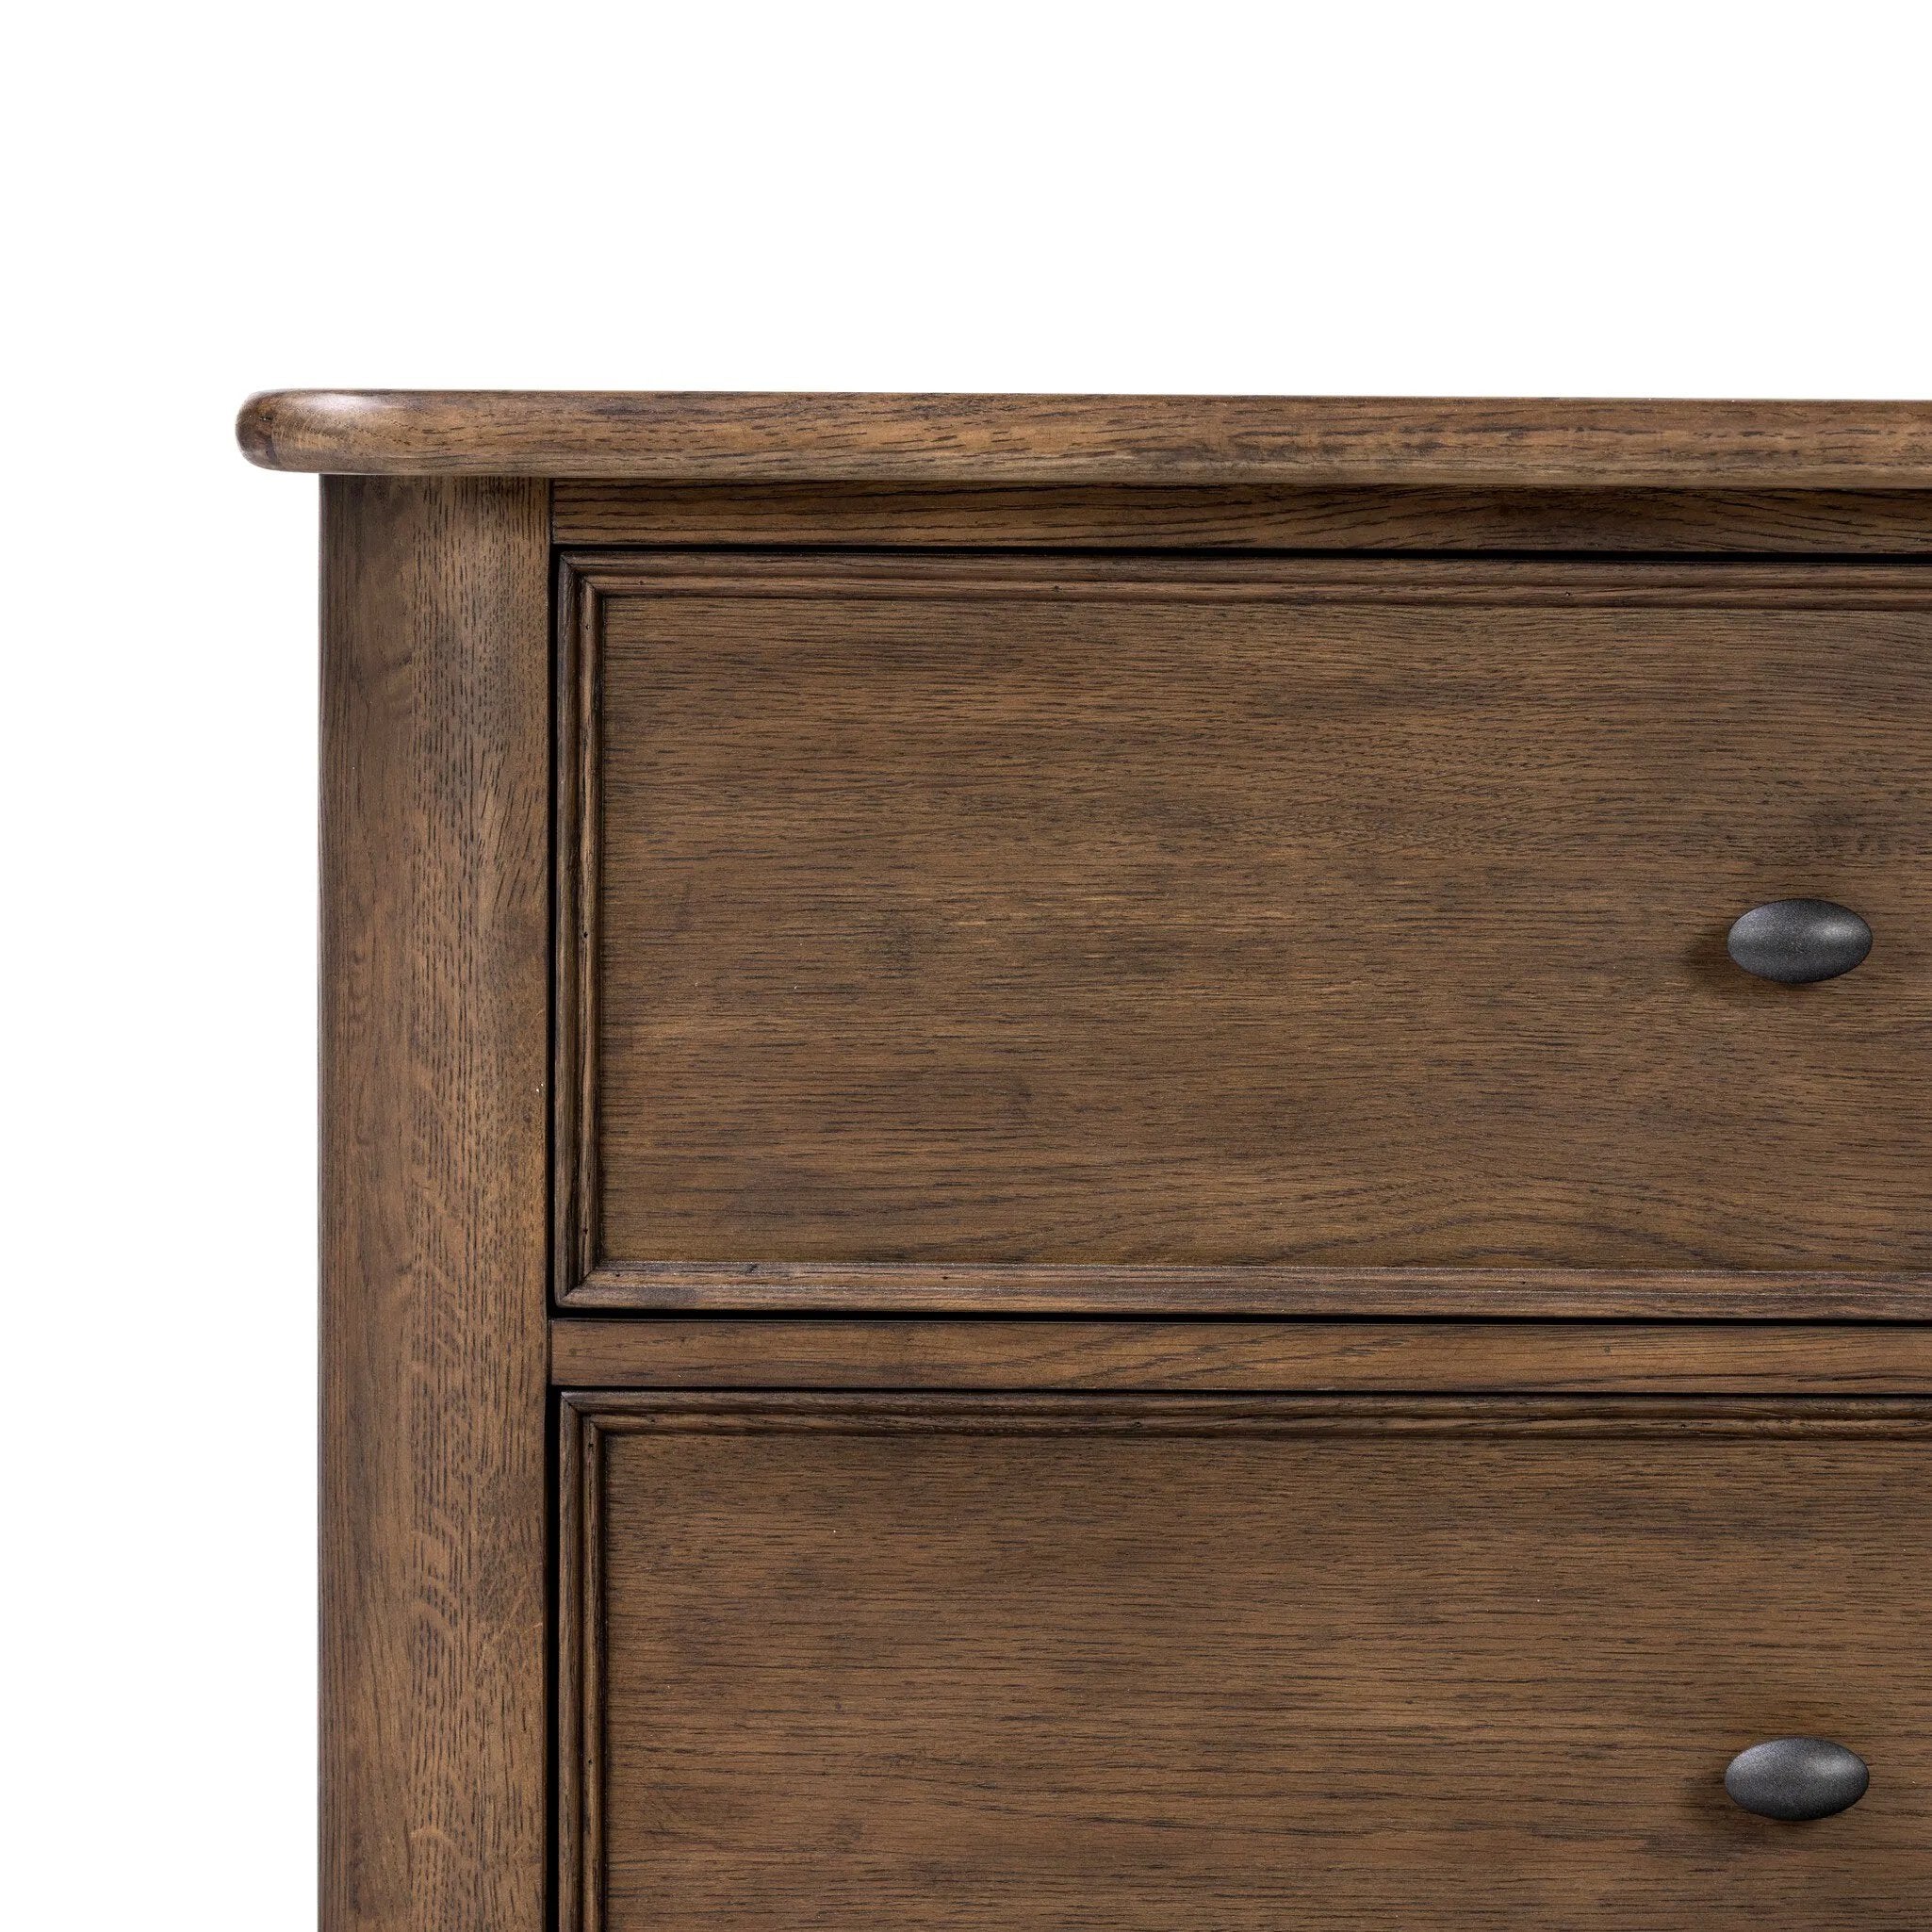 Like an heirloom nightstand with two roomy drawers, this aged oak design has room for it all. Detailed with an overhang surface, carved edges top to bottom, angled legs and oval drawer pulls finished in dark gunmetal.Collection: Bolto Amethyst Home provides interior design, new home construction design consulting, vintage area rugs, and lighting in the Newport Beach metro area.